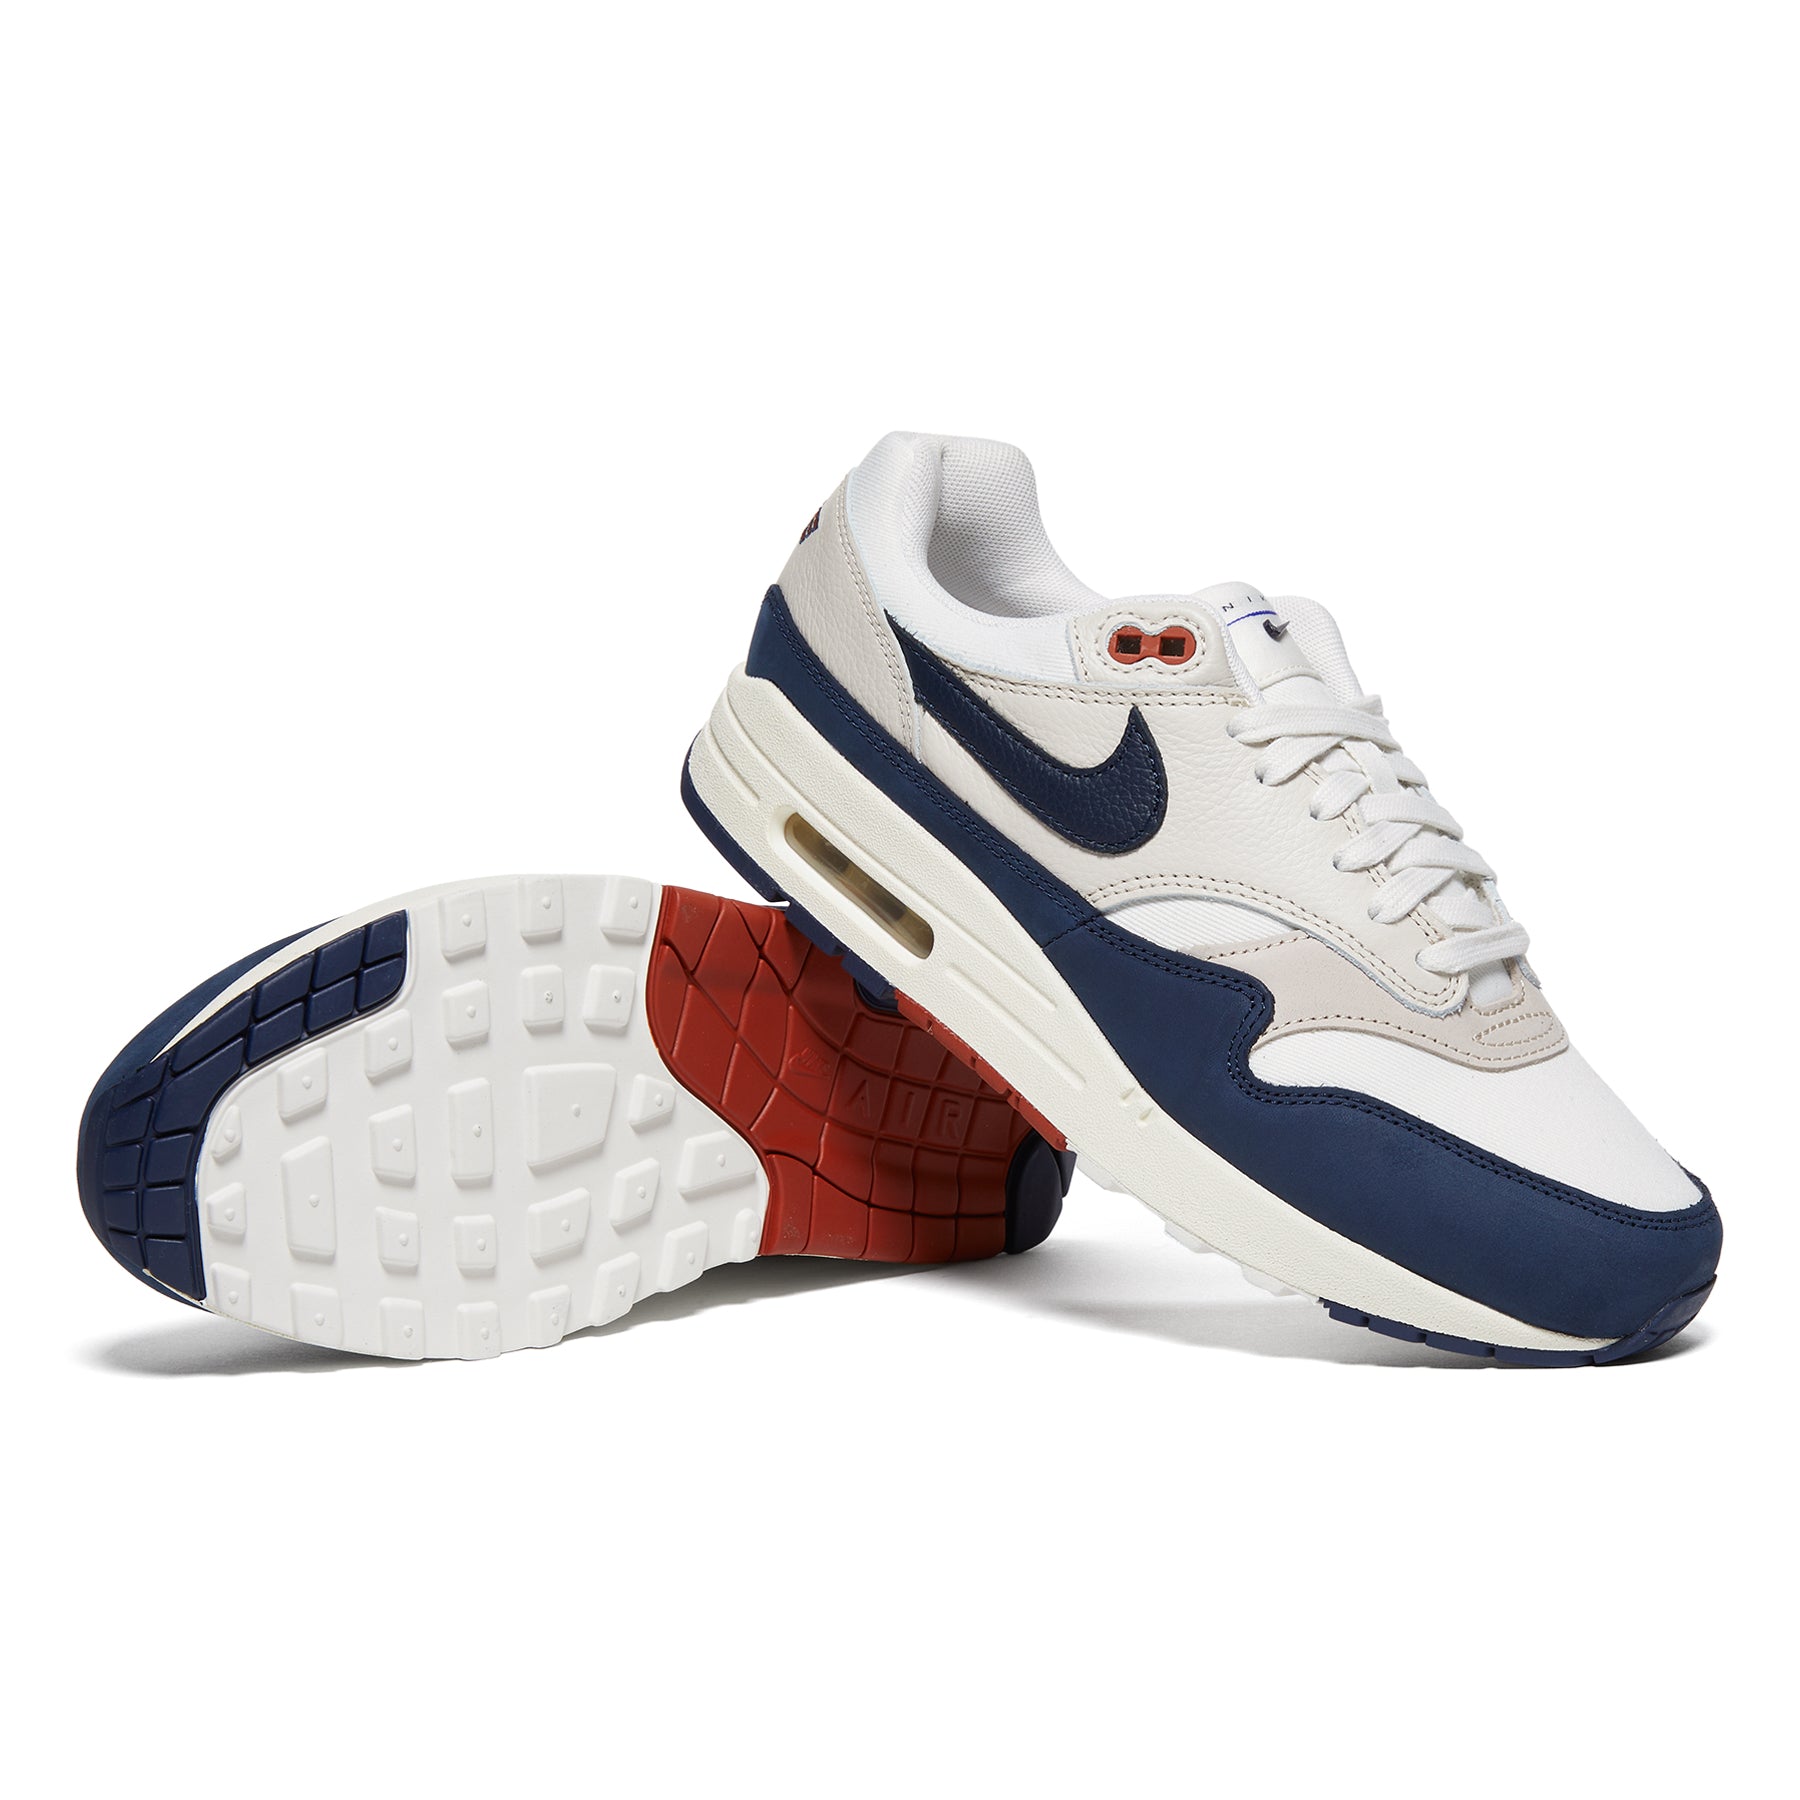 NIKE AIR MAX 1 “OBSIDIAN” WOMEN'S SHOES Dressed in a Light Orewood